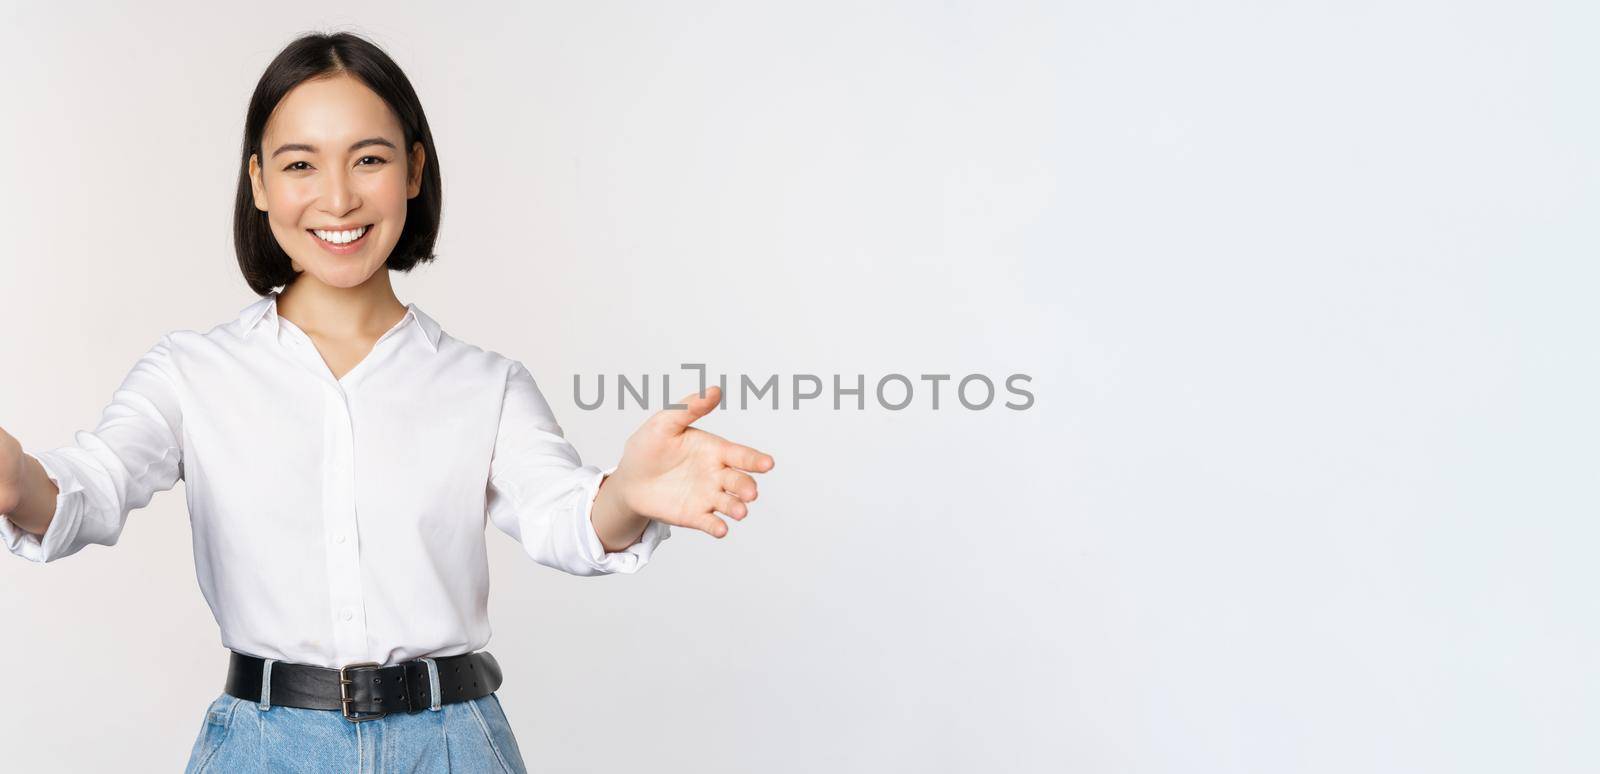 Image of smiling asian woman welcoming guests clients, businesswoman stretching out open hands, greeting, standing over white background.